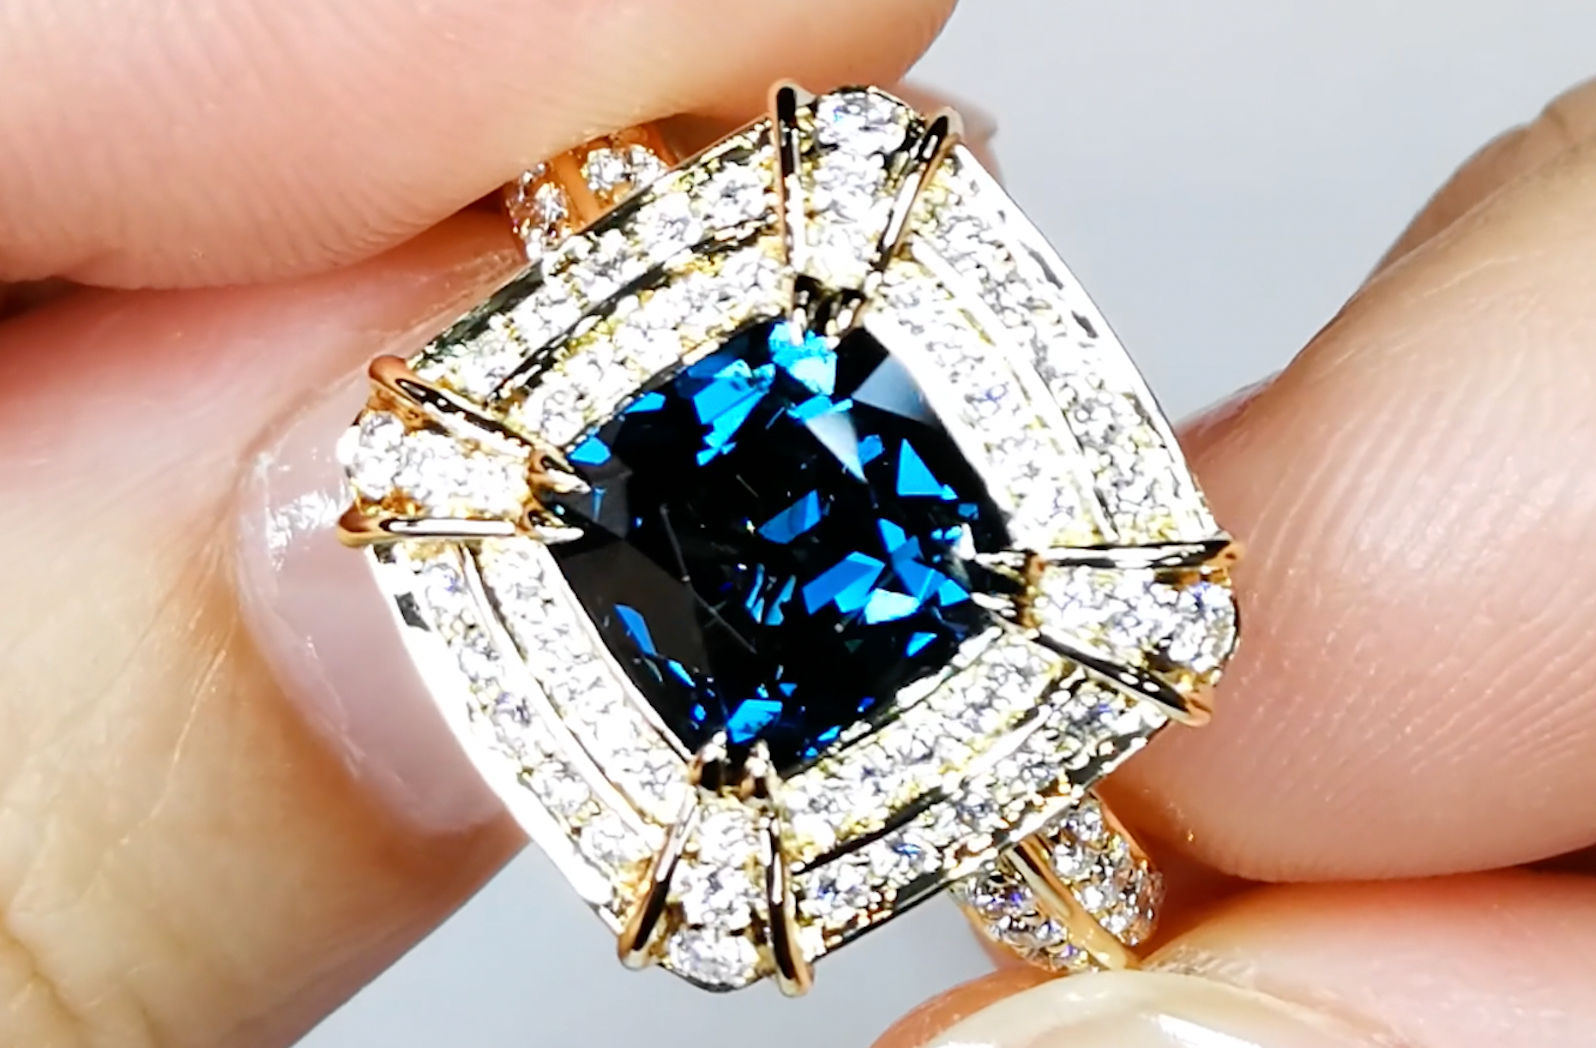 3.69ct Cobalt Spinel Ring with D Flawless Diamonds set in 18K Yellow Gold